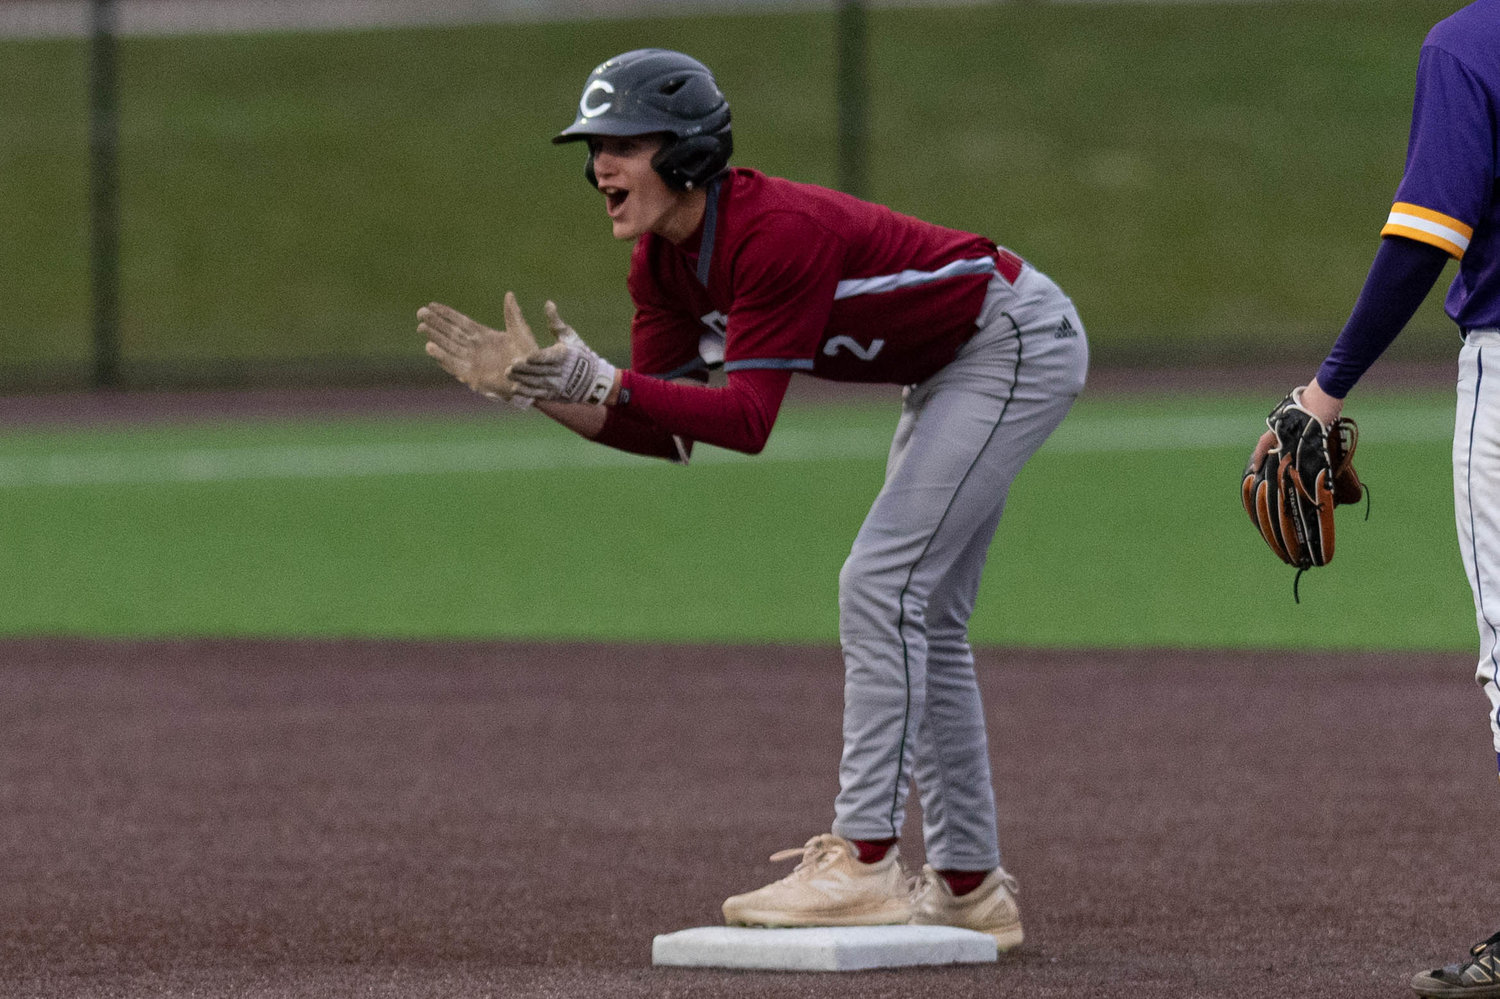 W.F. West's Braden Jones claps after his double scored two runs against Columbia River in the 2A District 4 semifinals May 11 at Ridgefield.